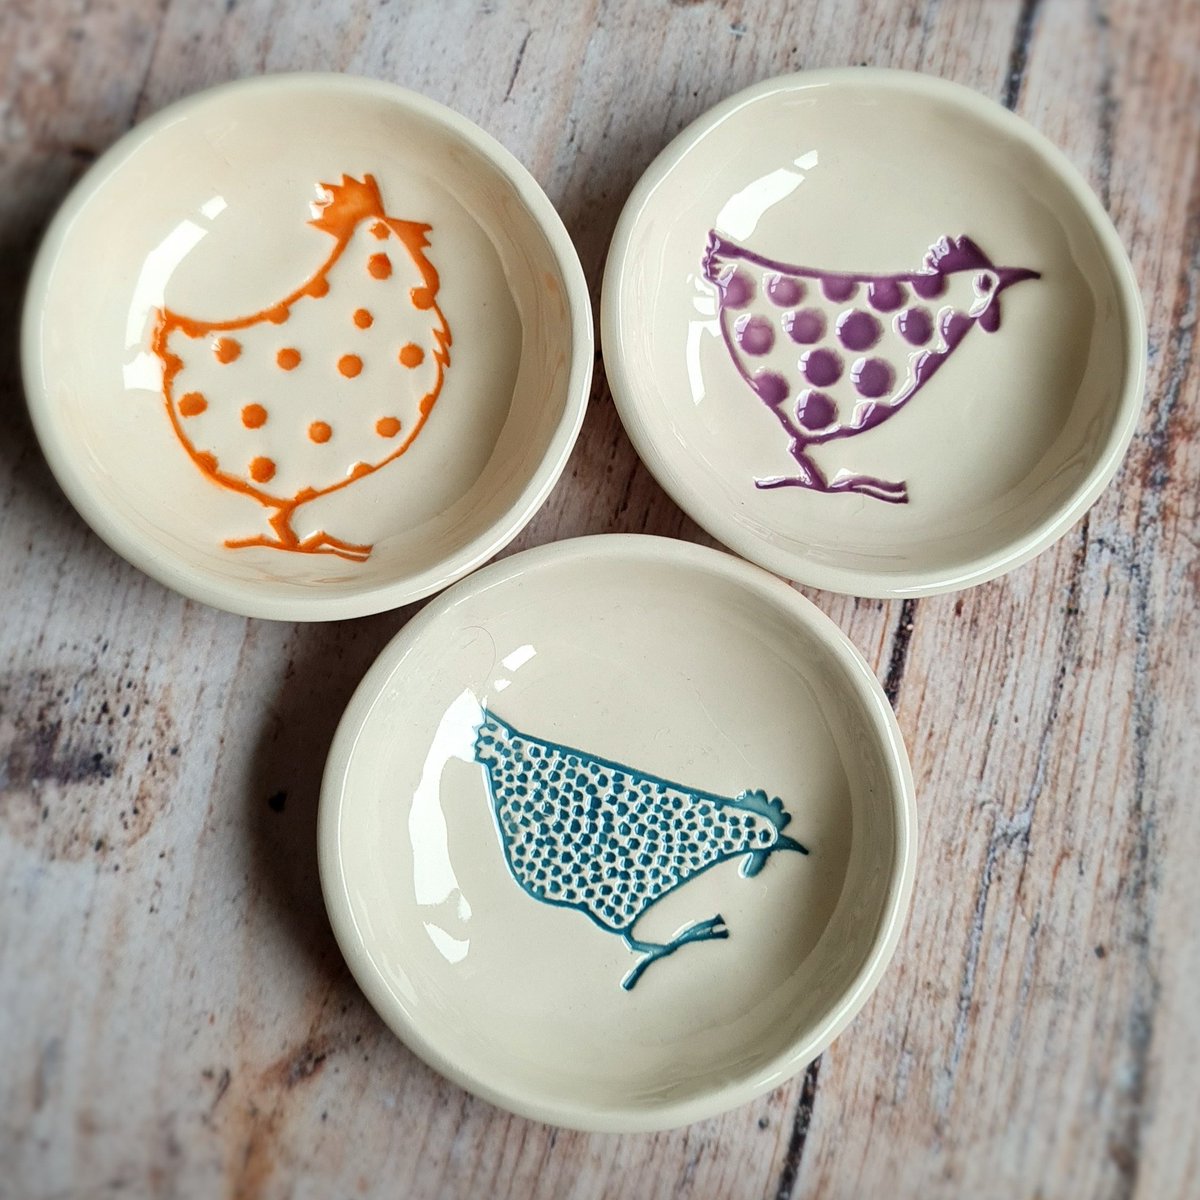 Chicken Dippers! I have made one set of these dotey dip bowls with fun colourful #chickens to brighten up any day! mapletreepottery.com/shop/bowls